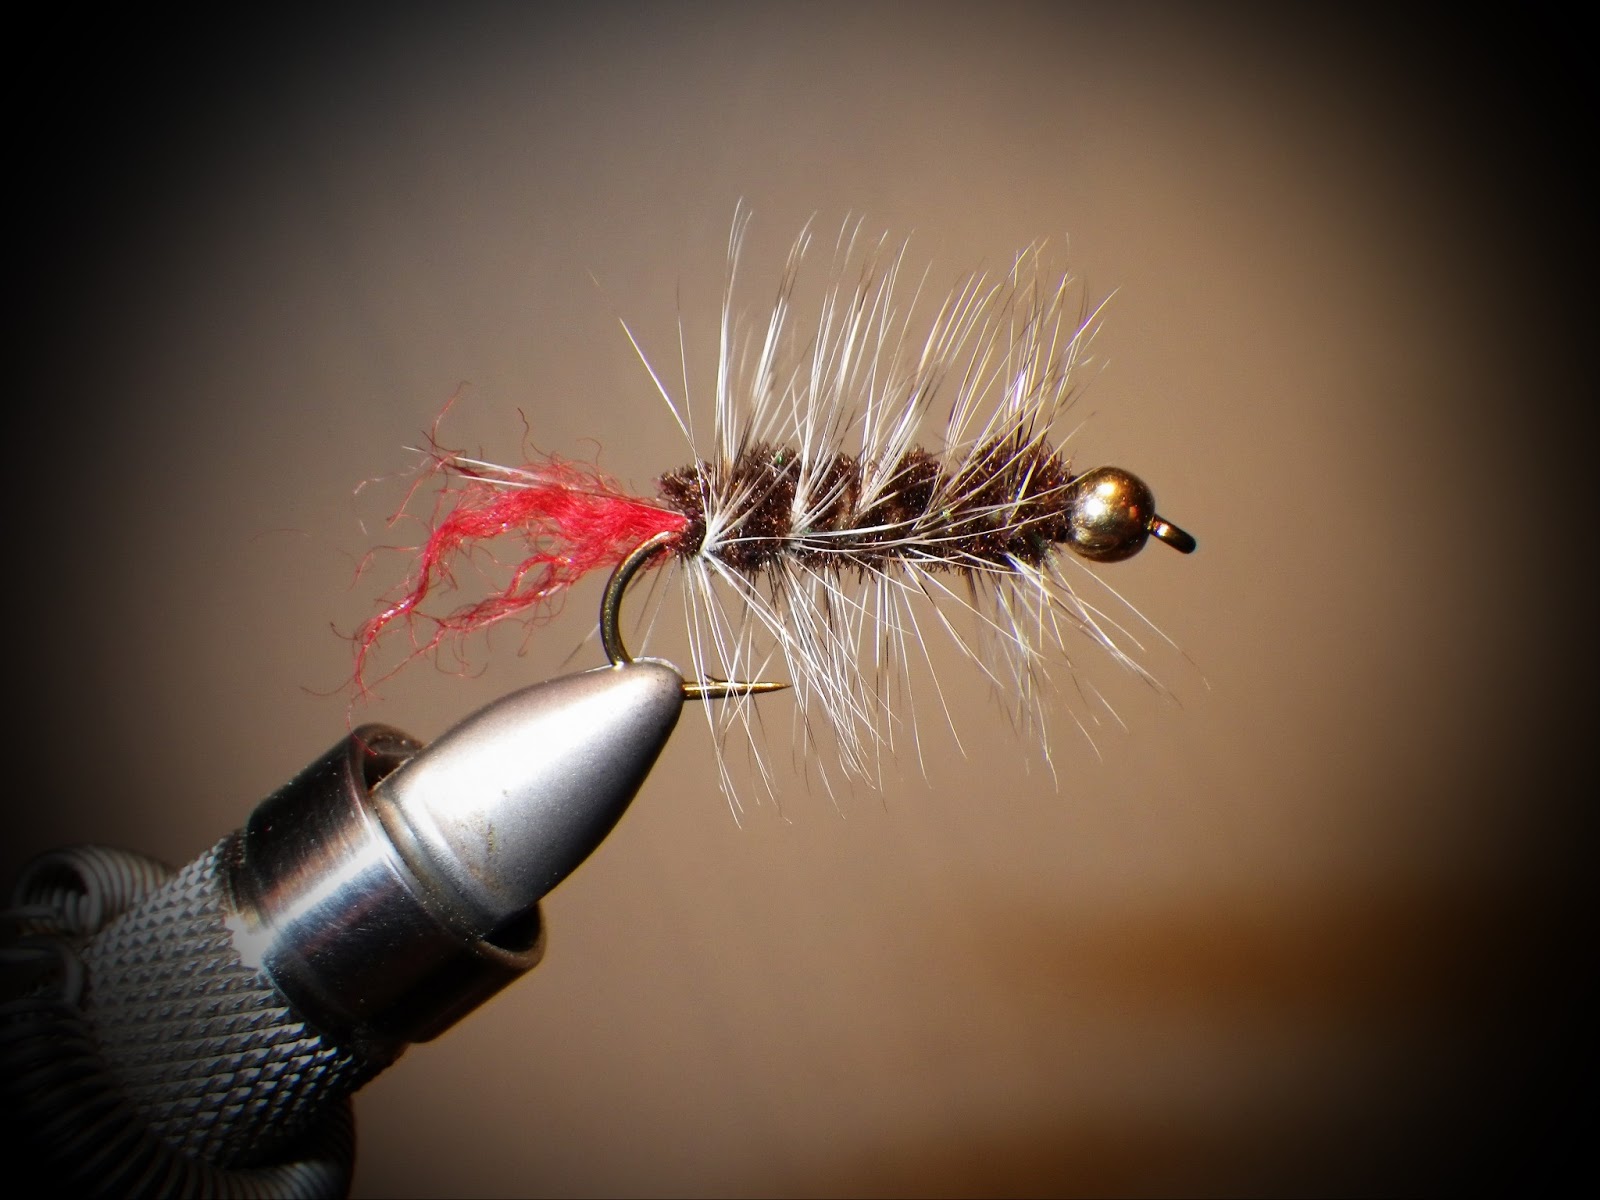 Home Waters: A Fly Fishing Life: January 2013